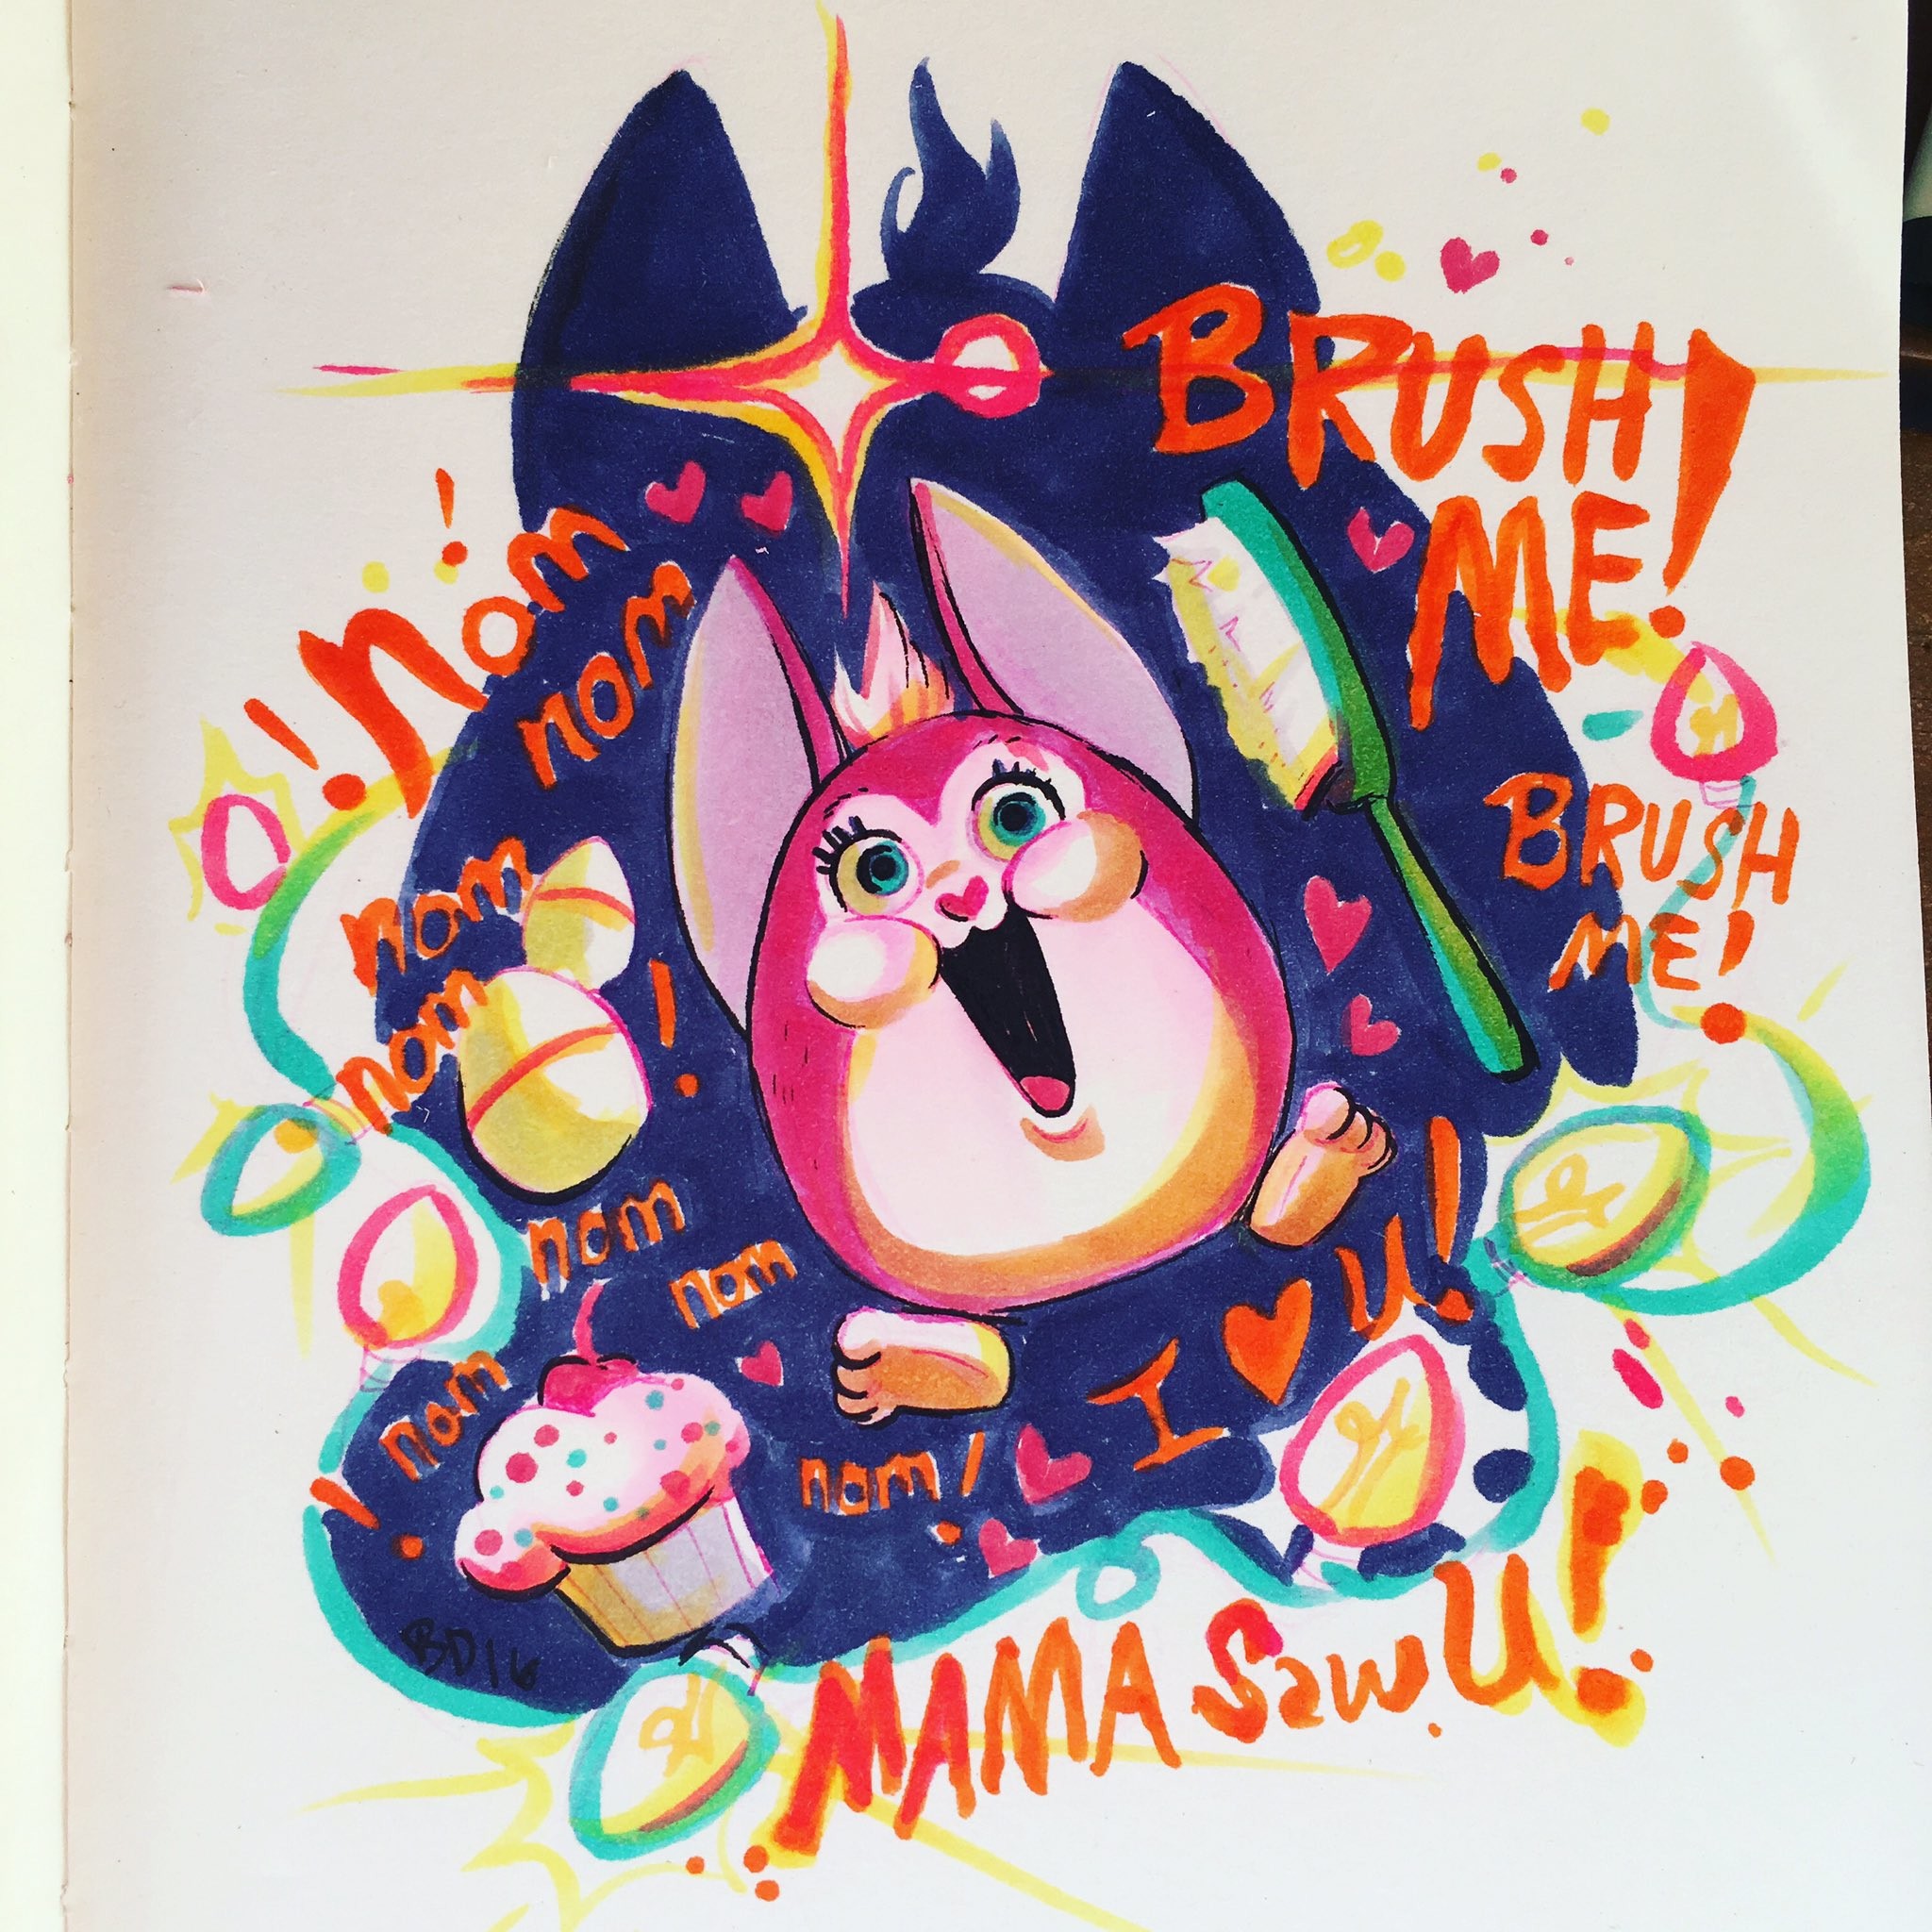 2048x2048 Brianne on Twitter: "Tattletail is on steam! @cartoonfuntime designed  Tattletail and @Cuppatan voices the critter that loves you so!  https://t.co/bM3vHHyzQX ...